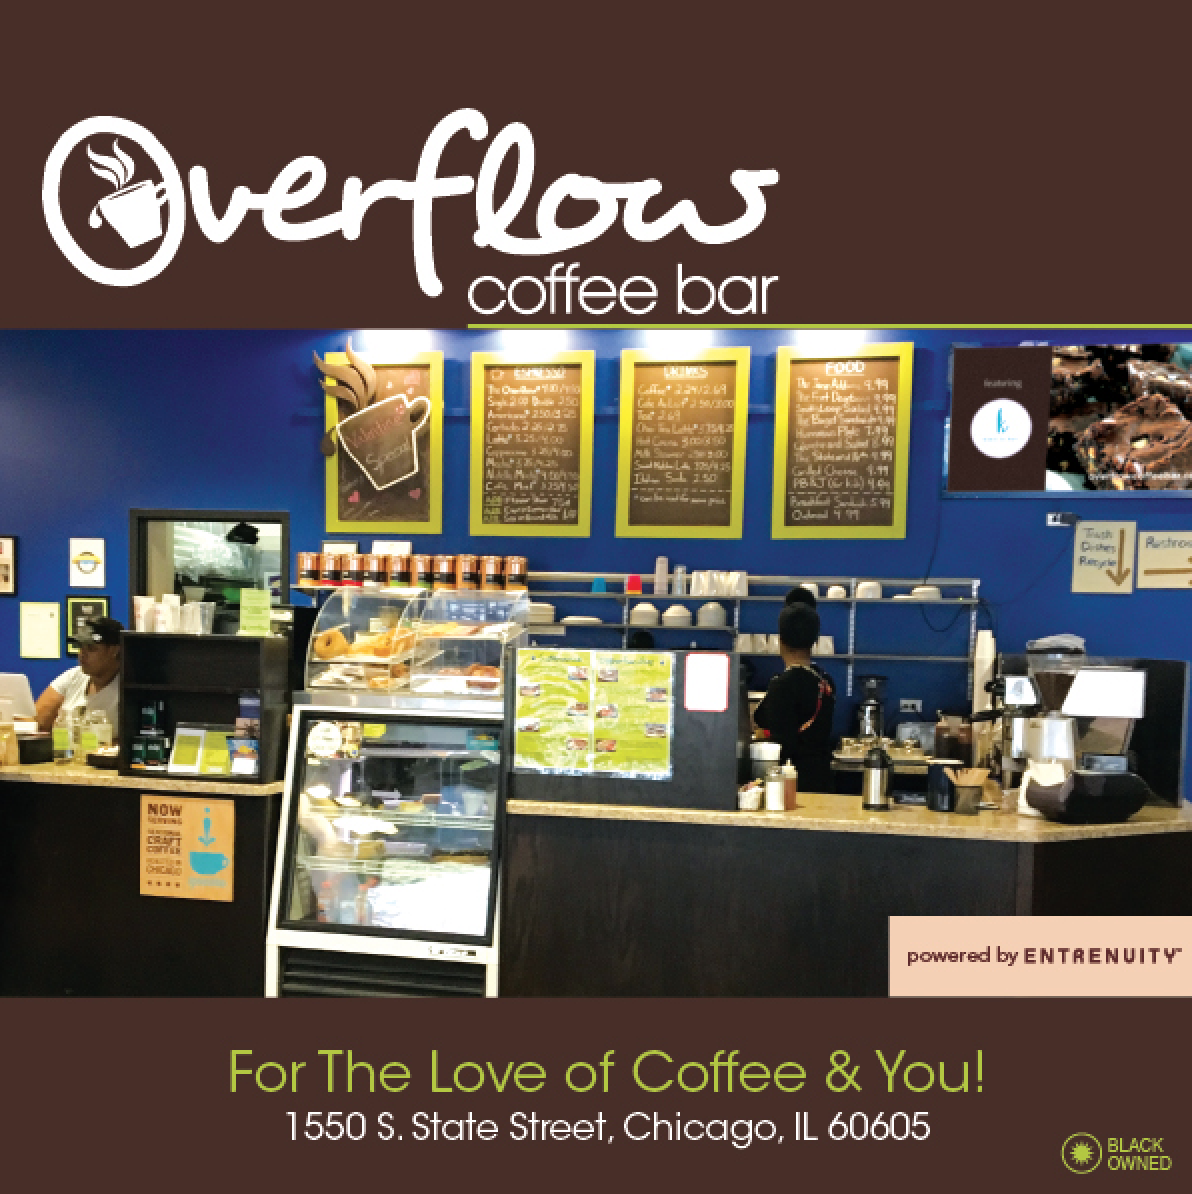 Entrenuity Purchases Overflow Coffee Bar